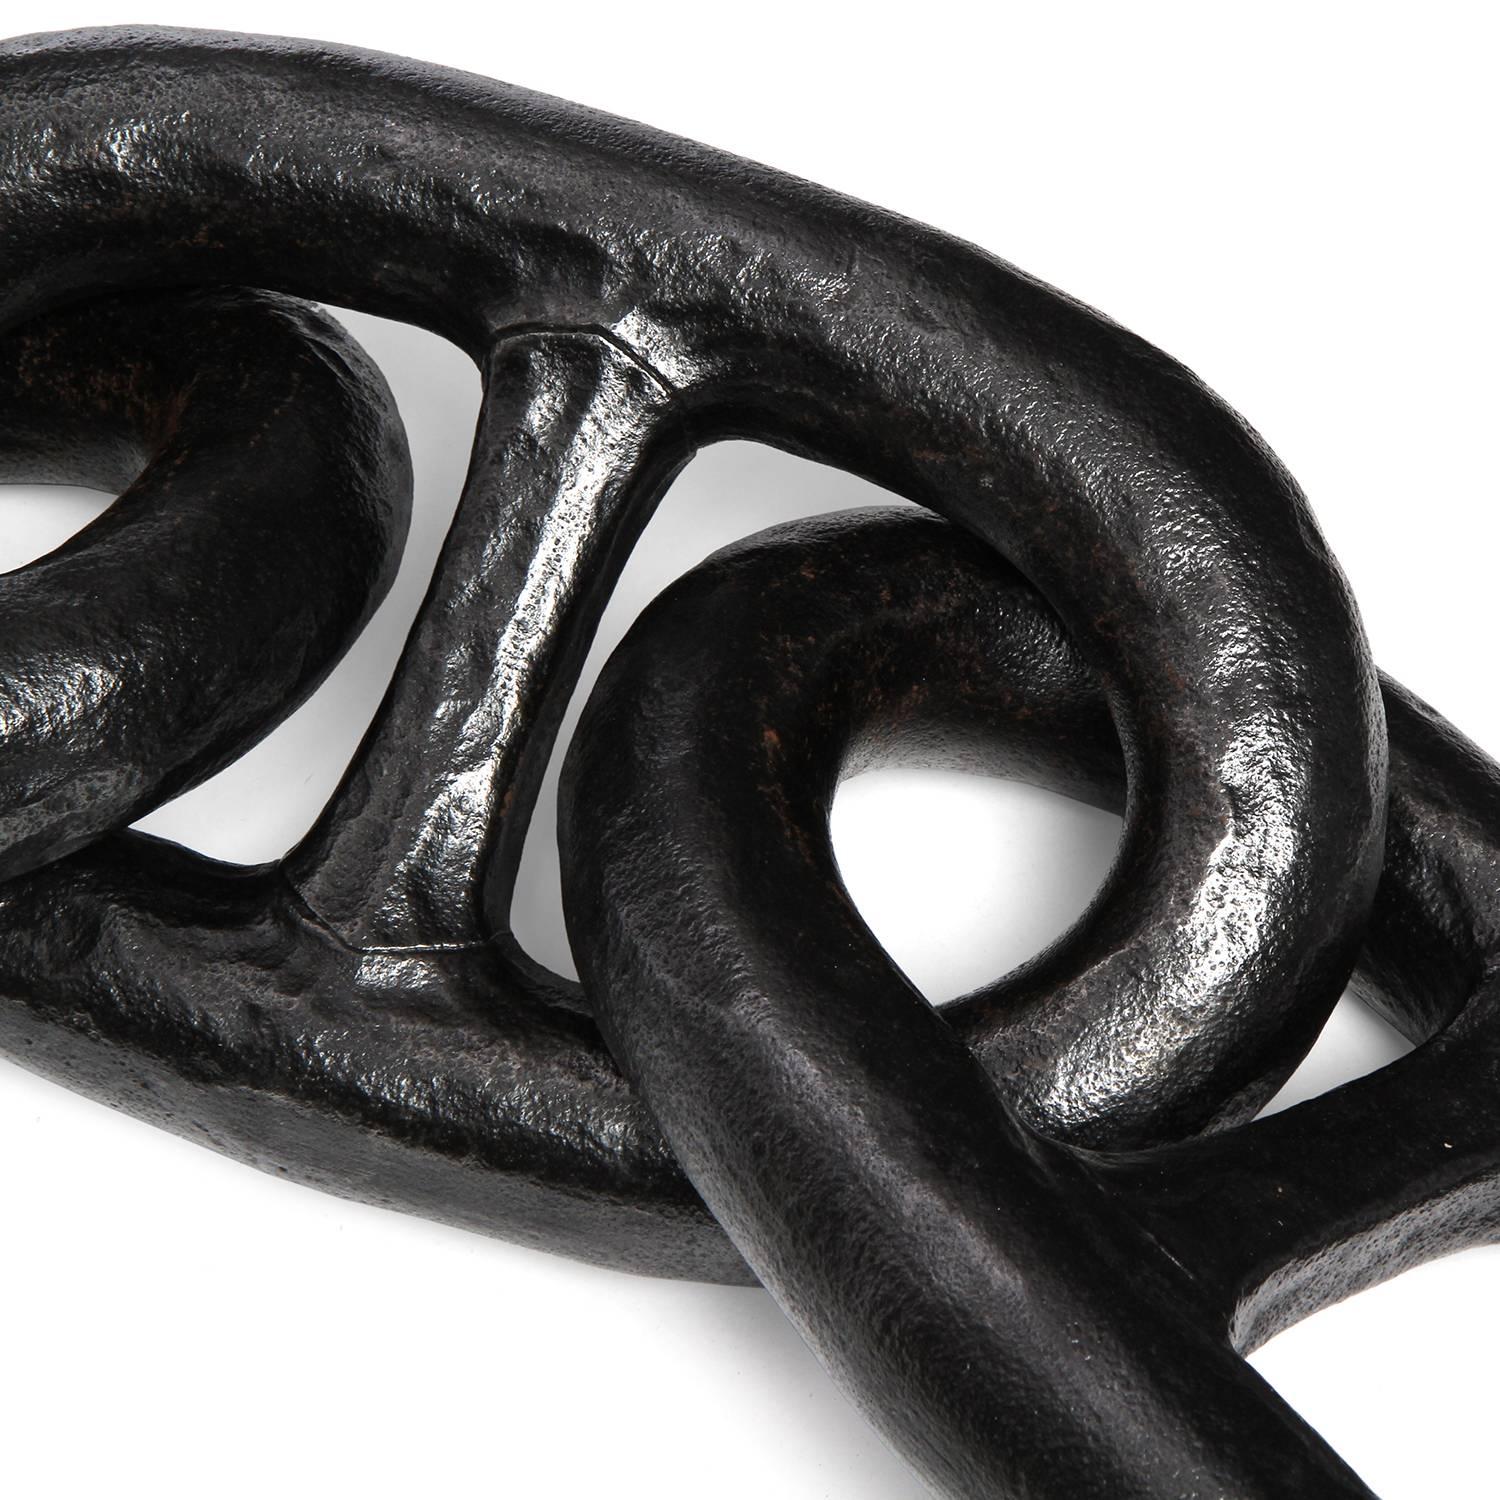 American Patinated Forged Iron Chain Links For Sale